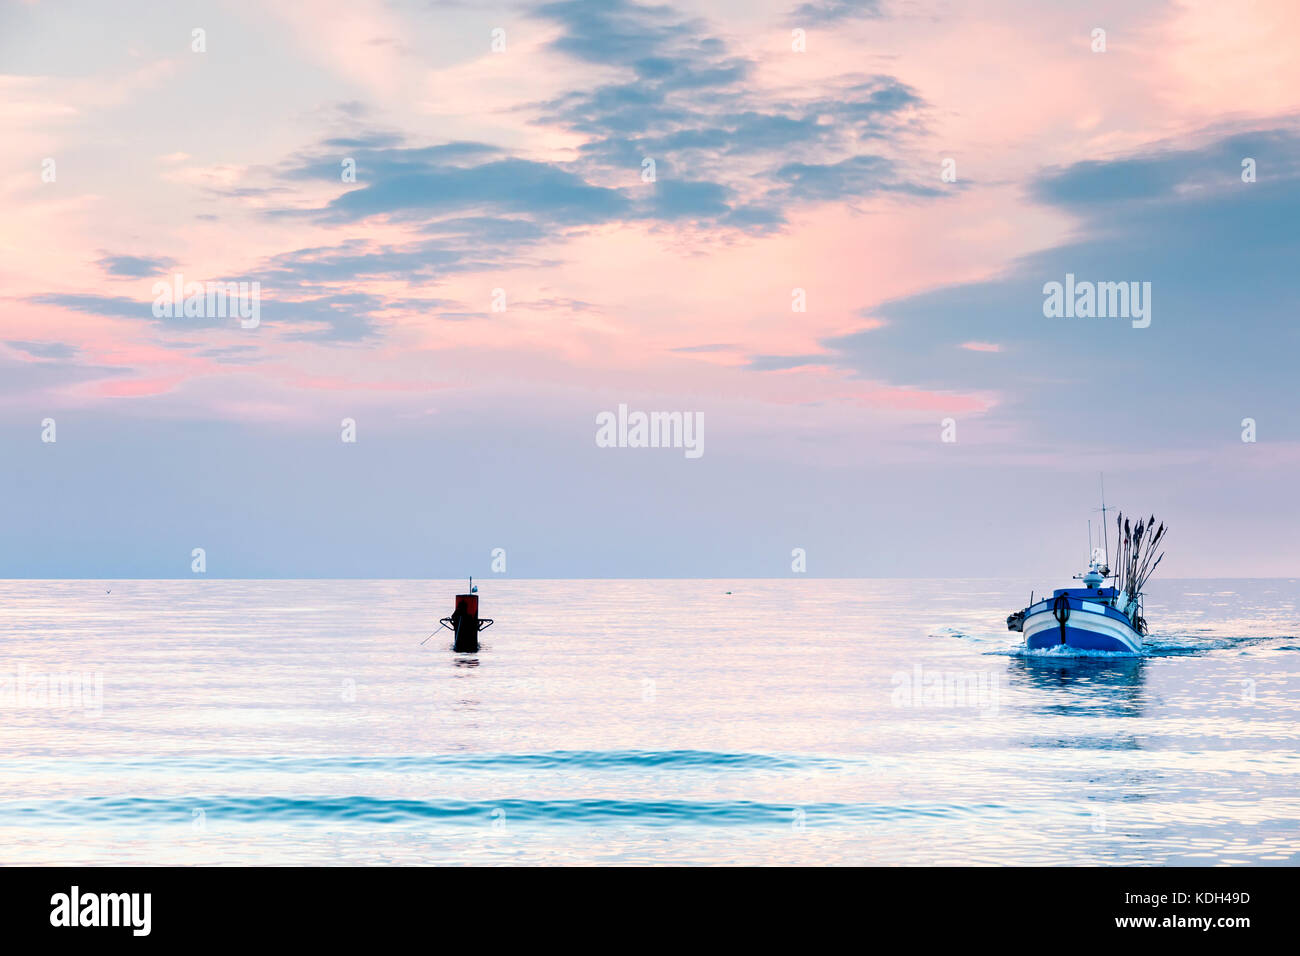 Sights of Poland. Sunset at Baltic sea with fishing boats. Stock Photo